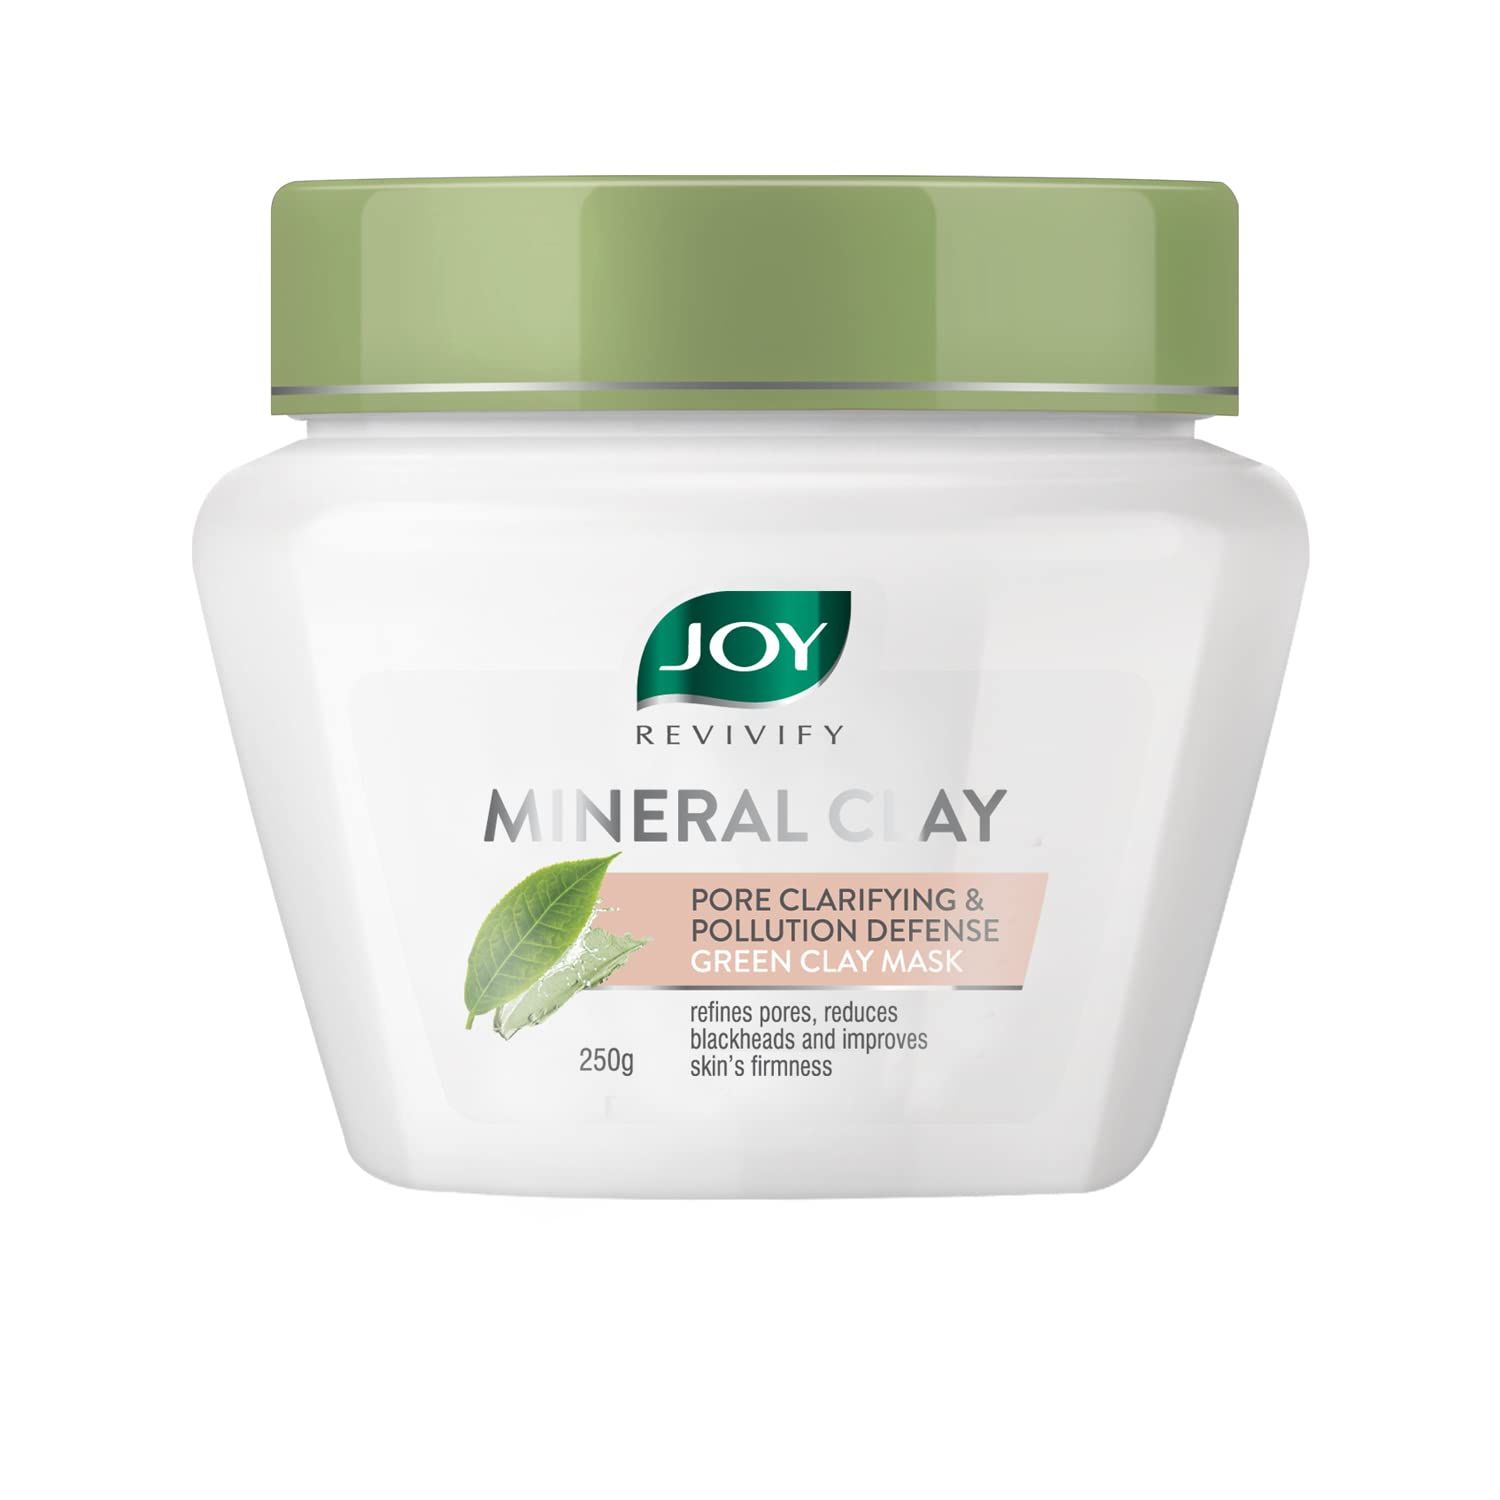 Buy Joy Revivify Green Clay Mask | Pore Clarifying and Pollution Defense Mask | With Green Tea, Hyaluronic Acid, Jojoba Seed Oil & Lemongrass Oil | No Parabens | For All Skin Types | Clay Face Mask, 250g - Purplle